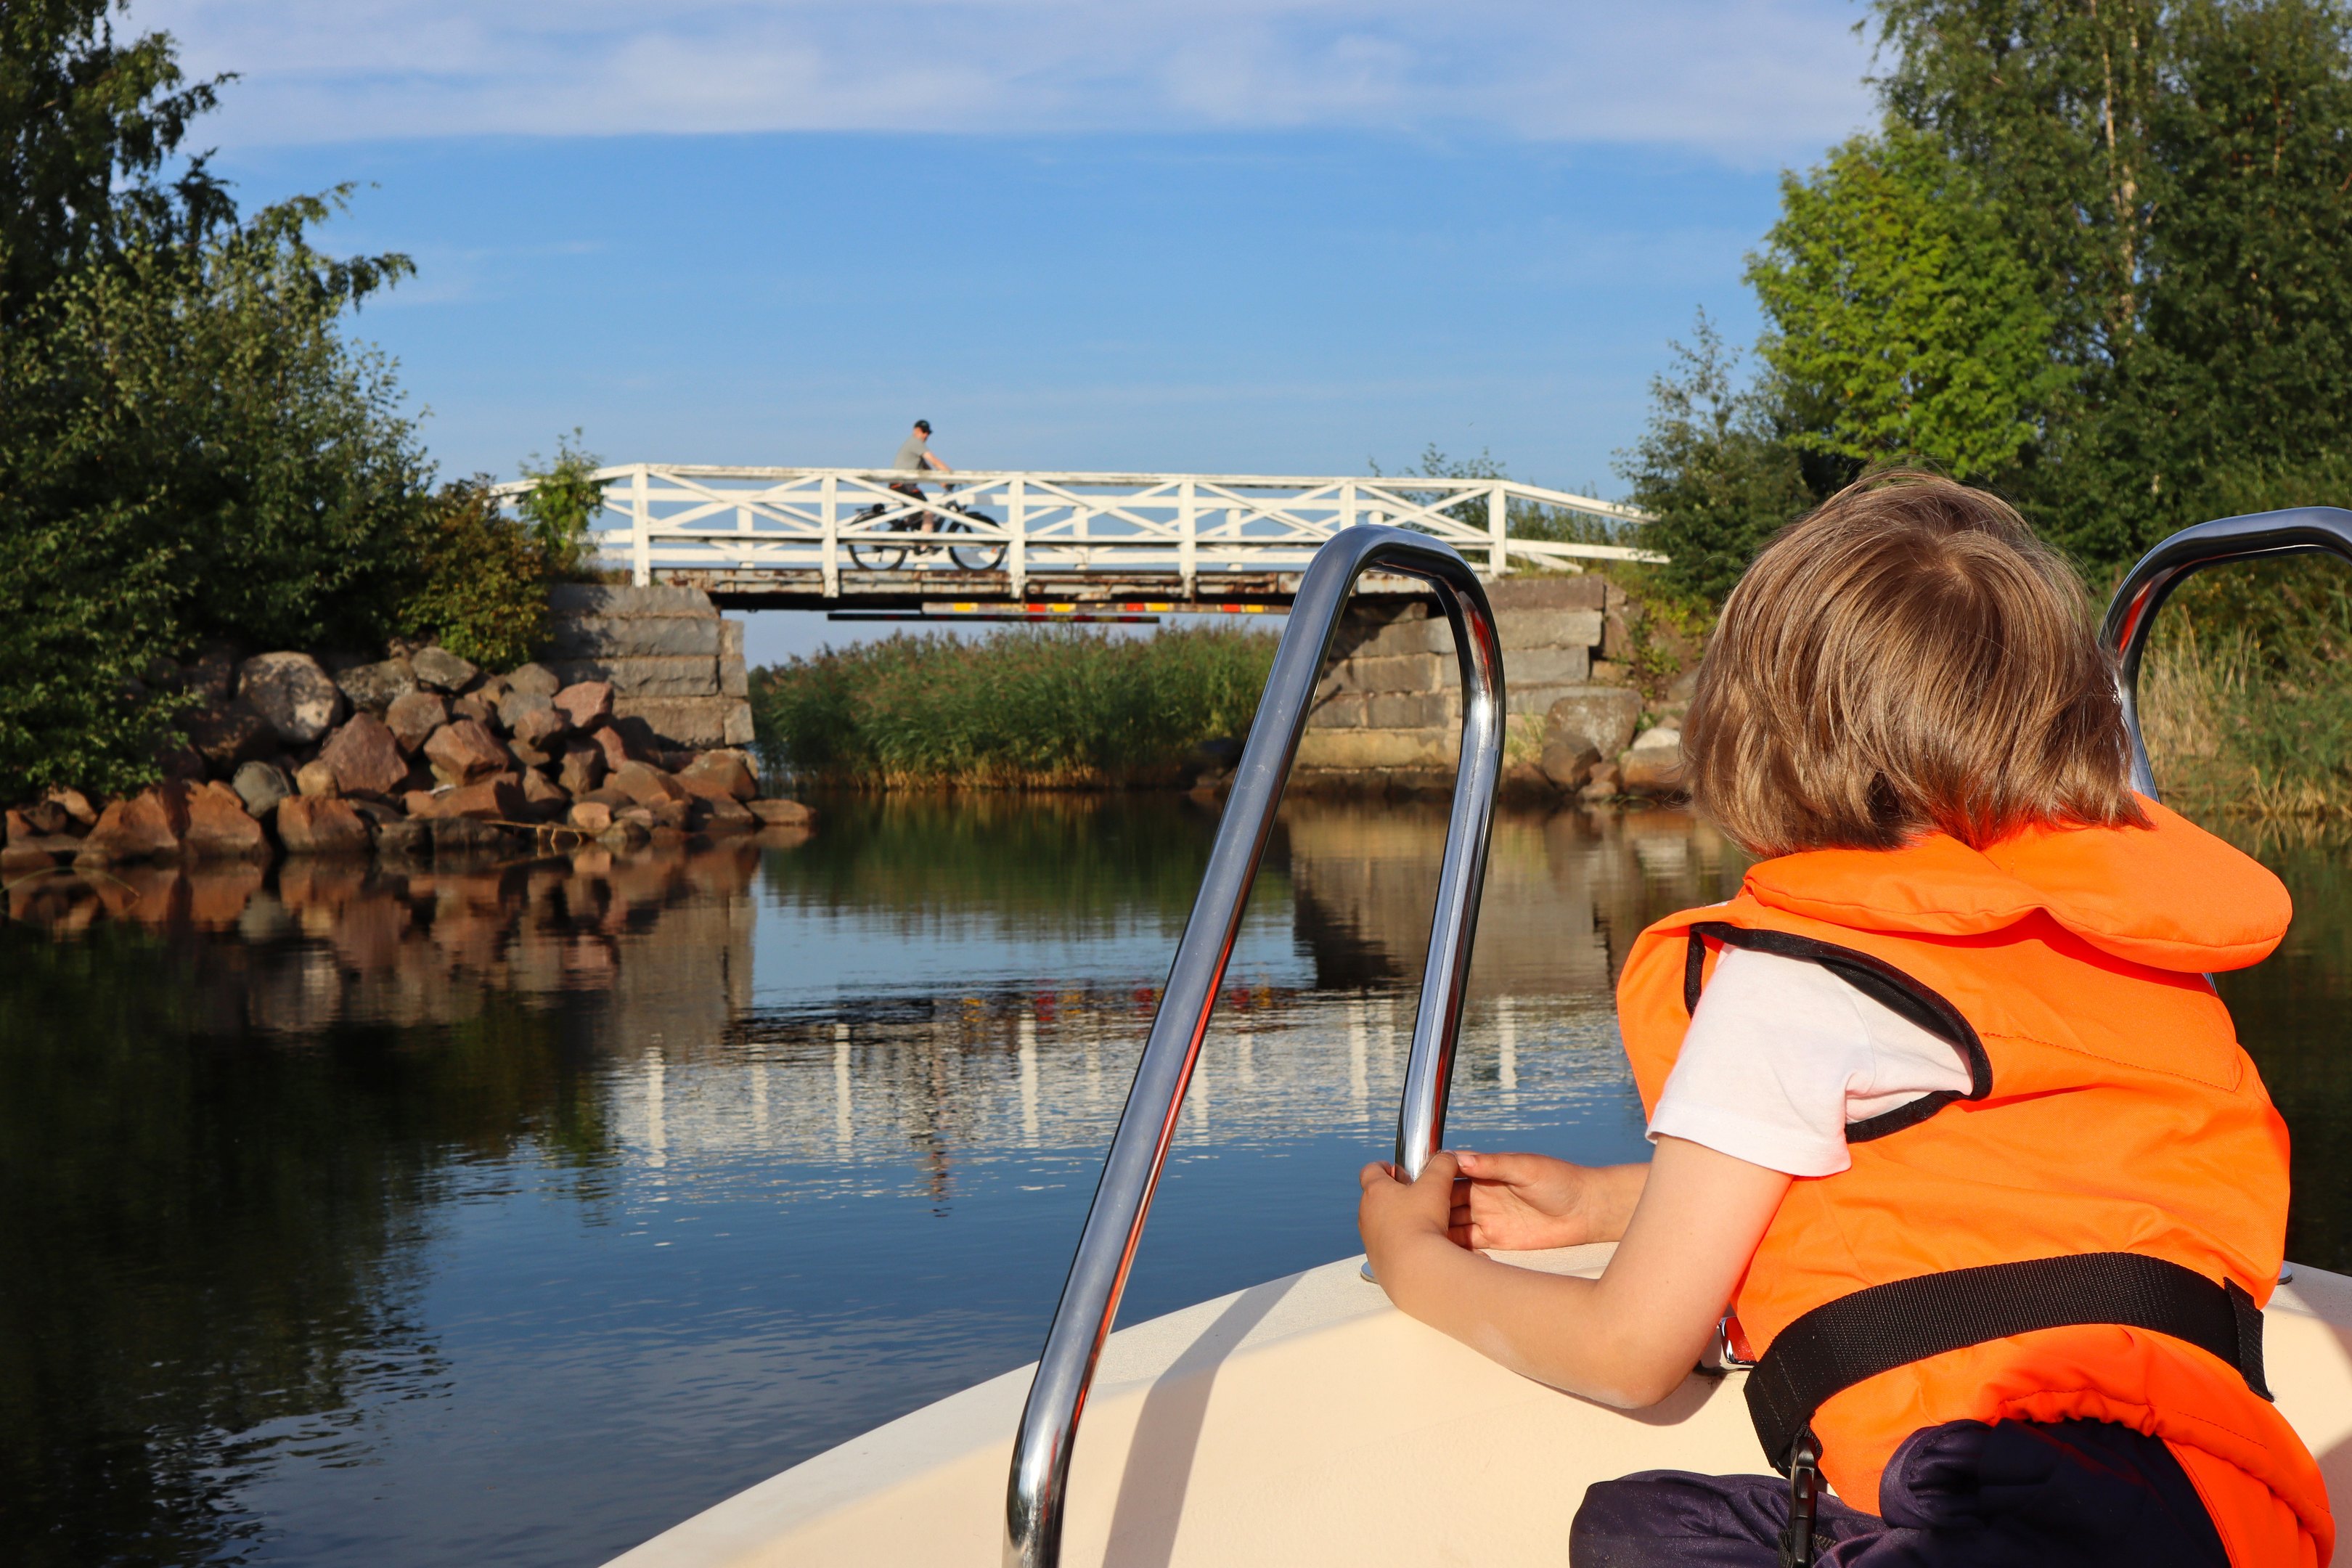 Boy on a boat in Raahe